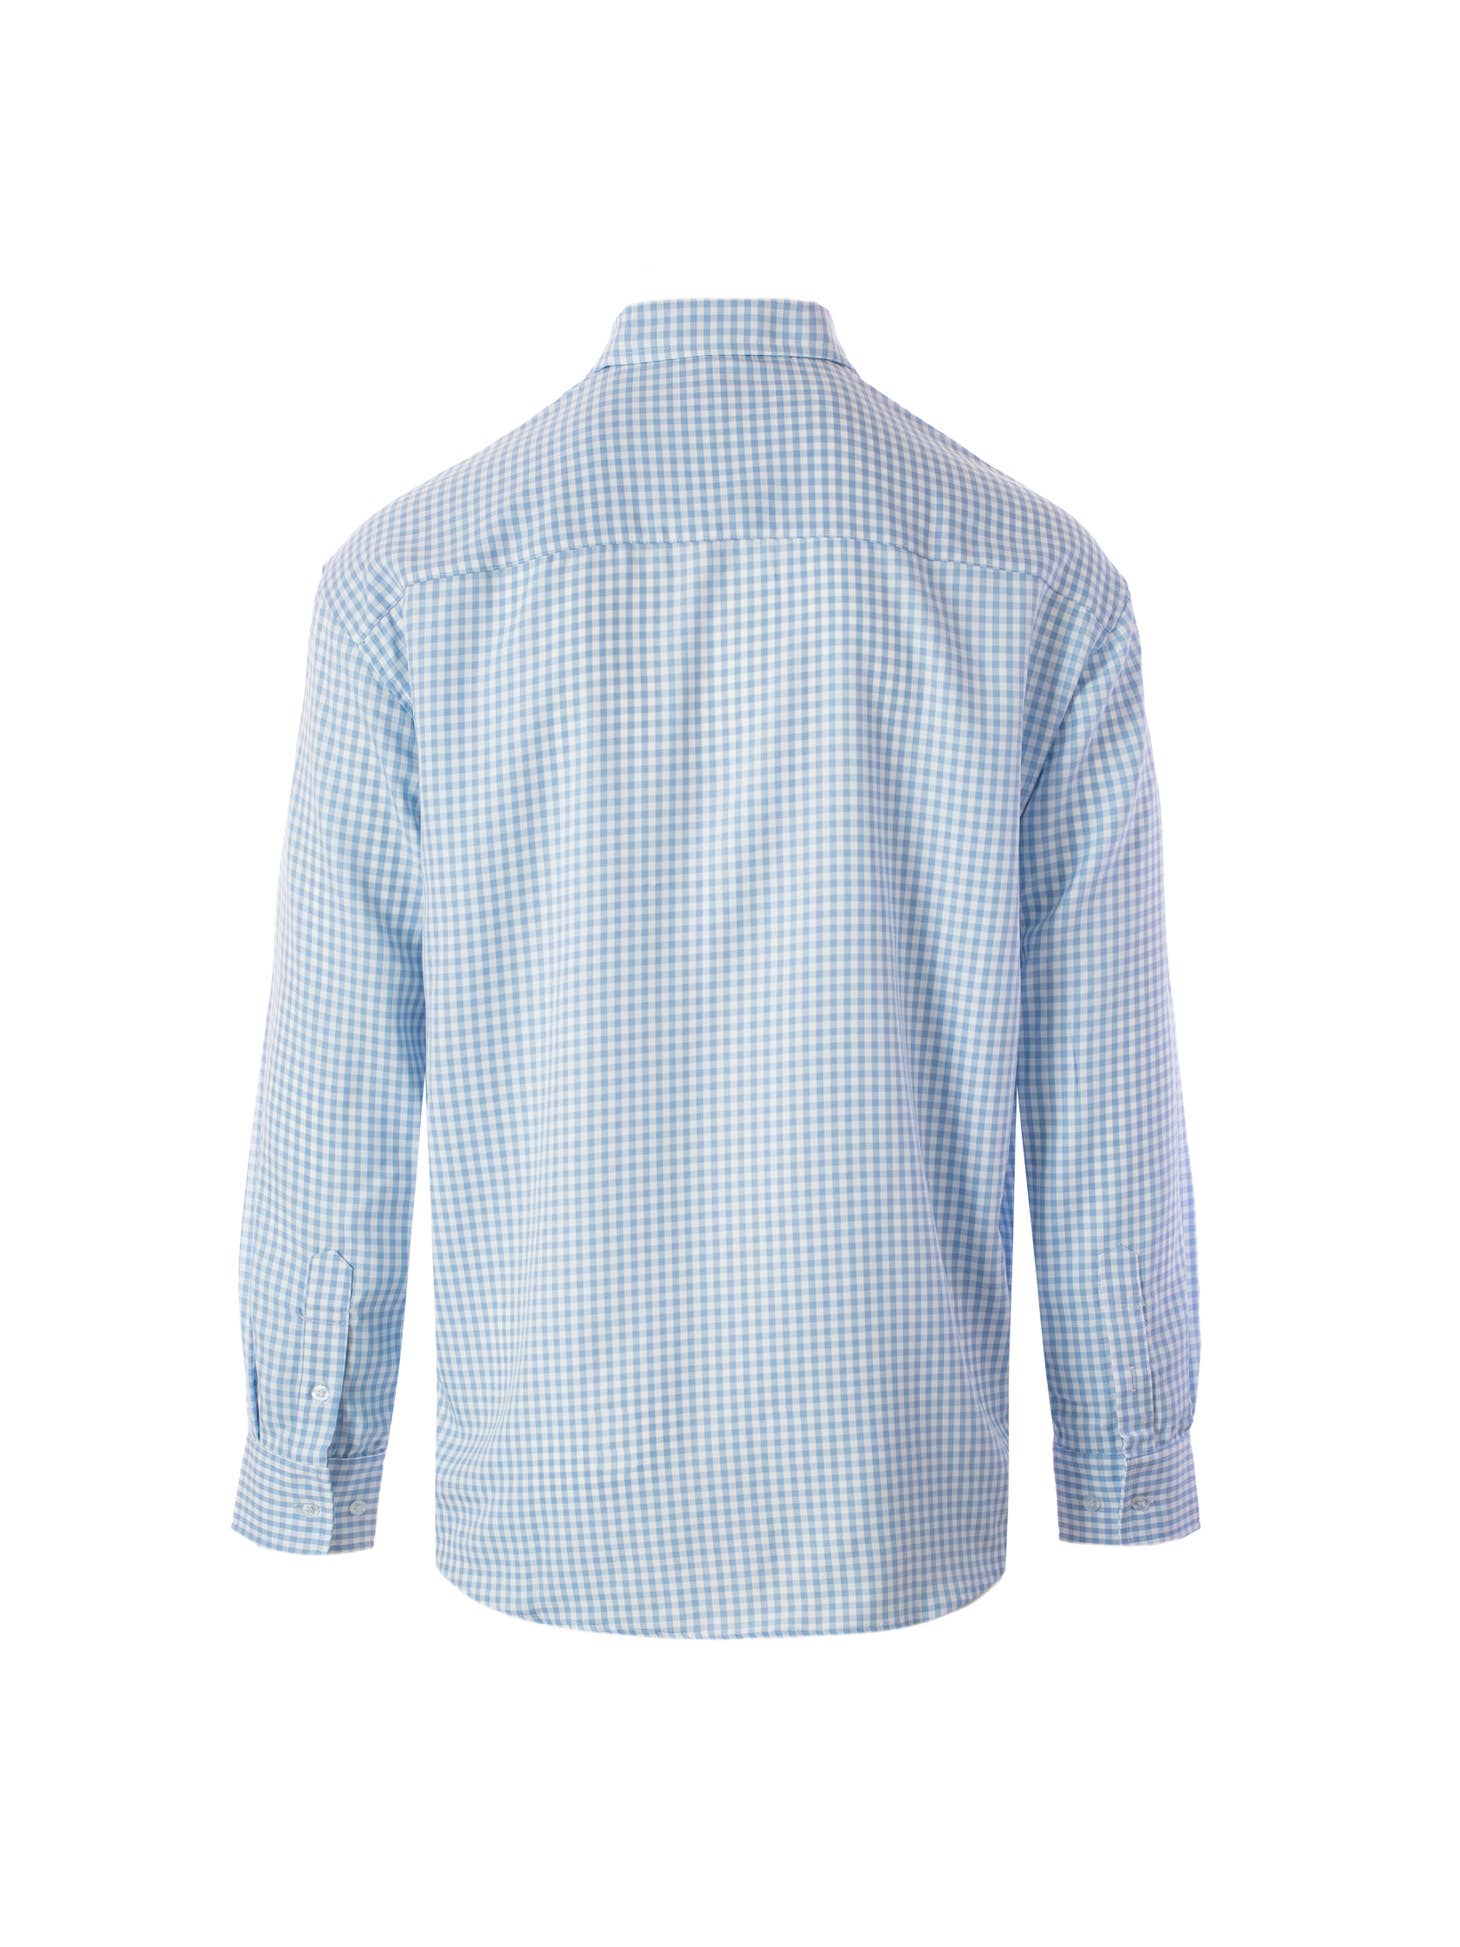 A Fieldstone Outdoor Provisions Co. L/S Braxton Button Down shirt in blue and white checkered pattern on a white background.